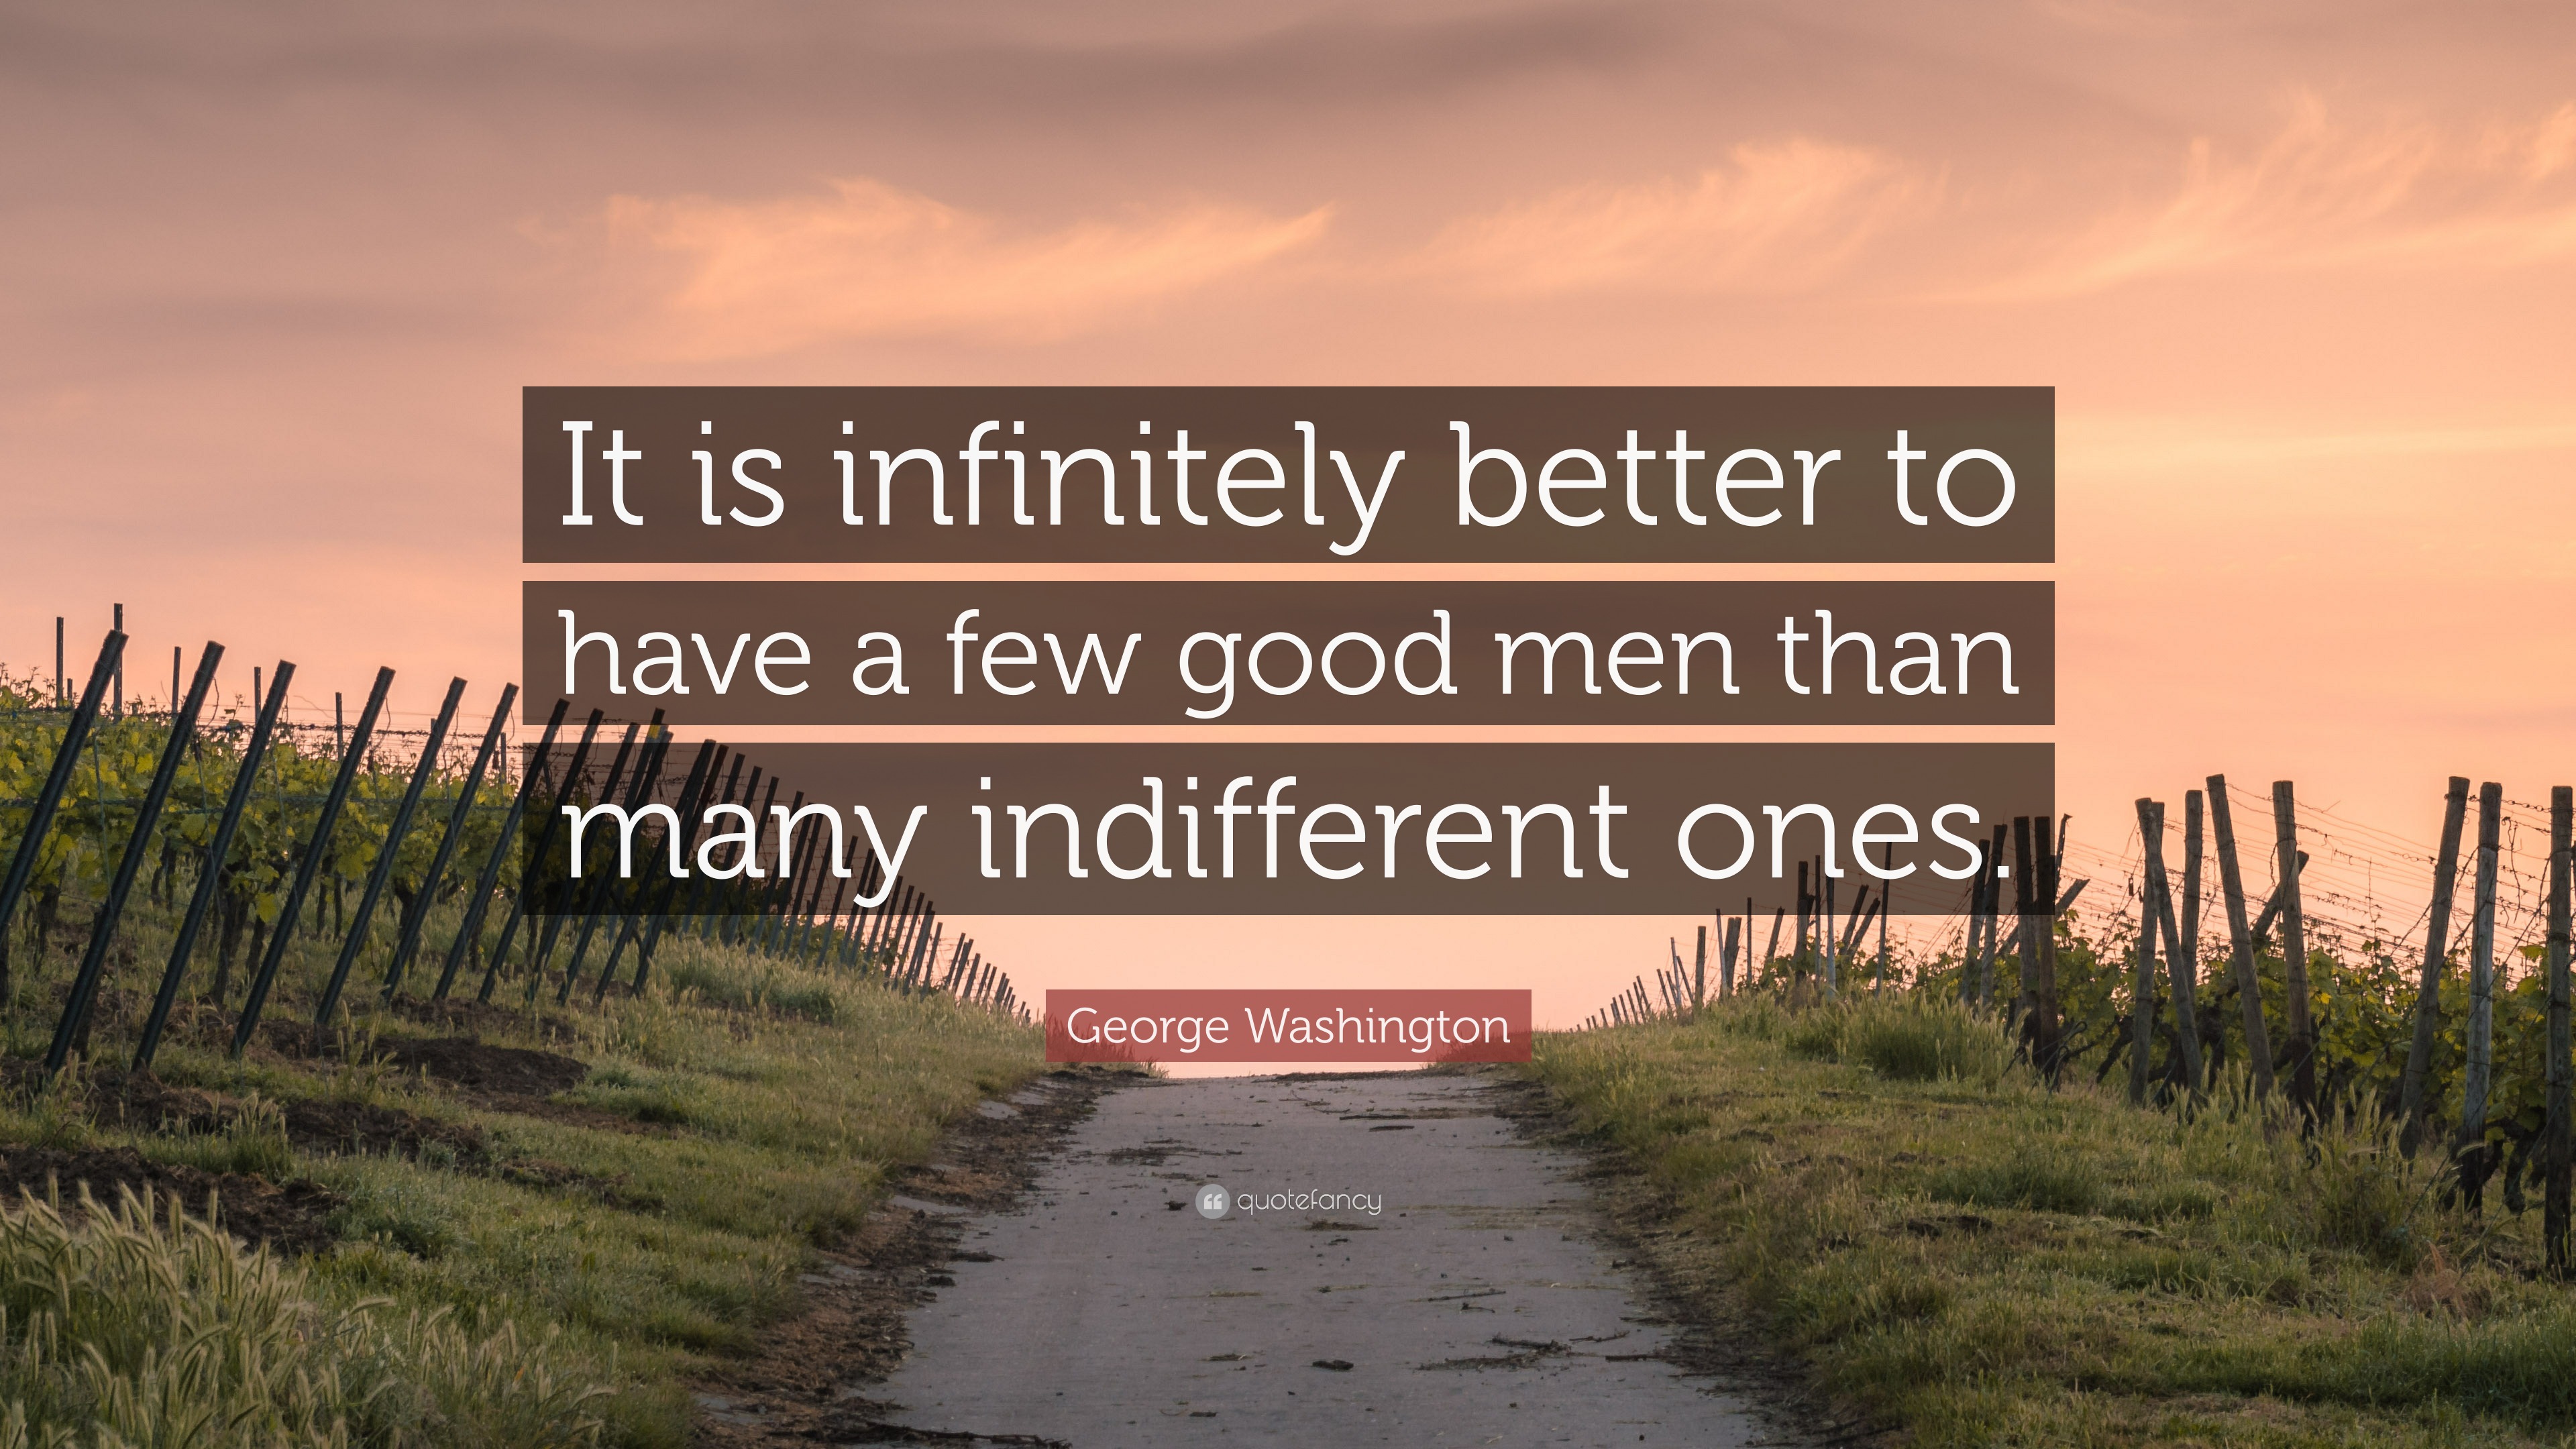 This is how to be a good man, according to a few good men